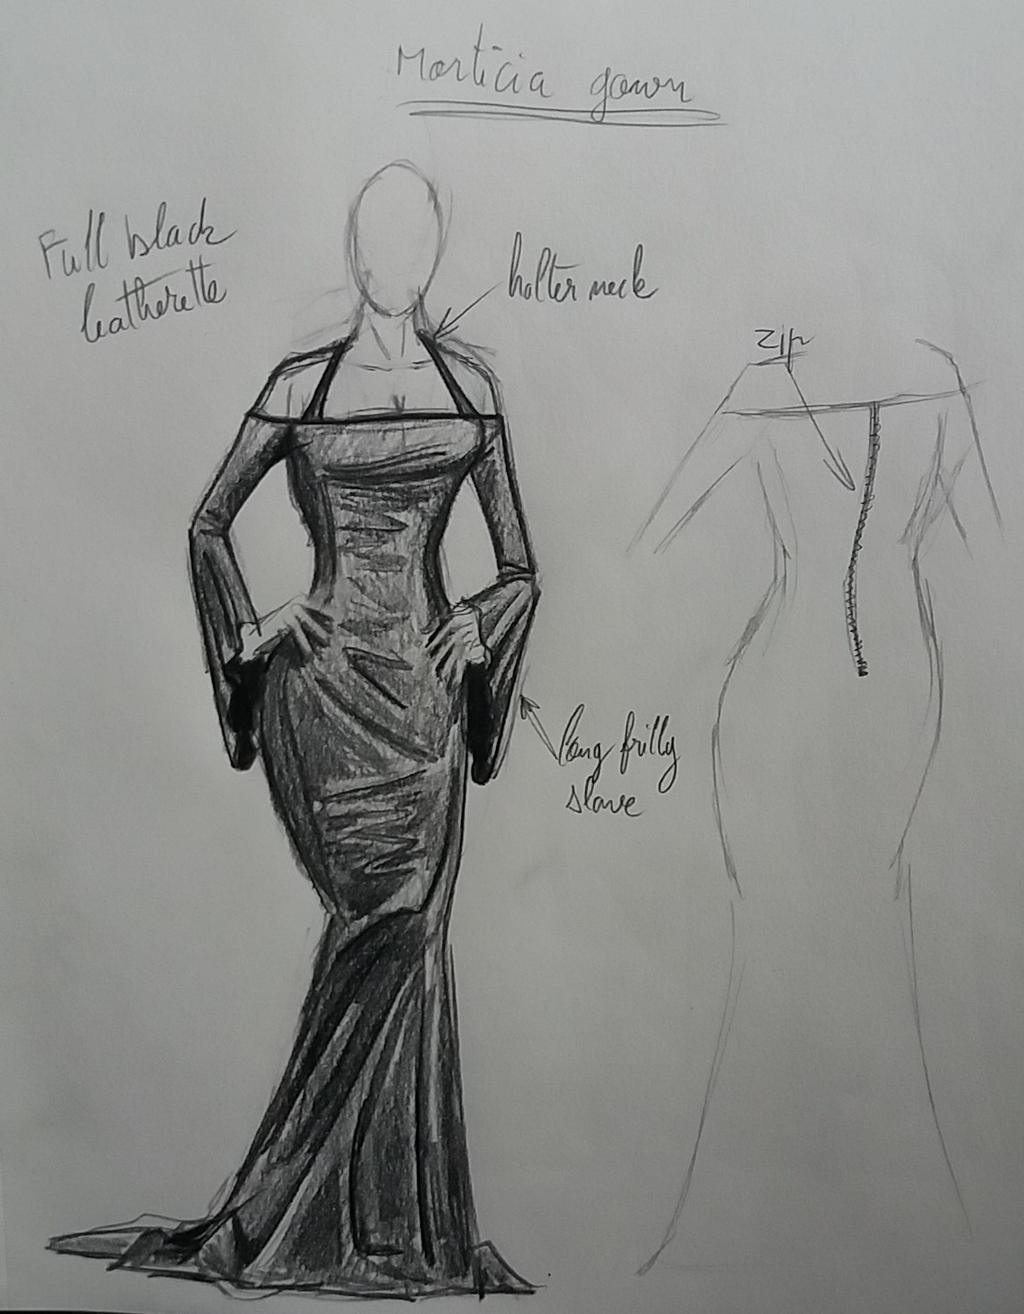 Morticia Addams style gown by pibraclab on DeviantArt